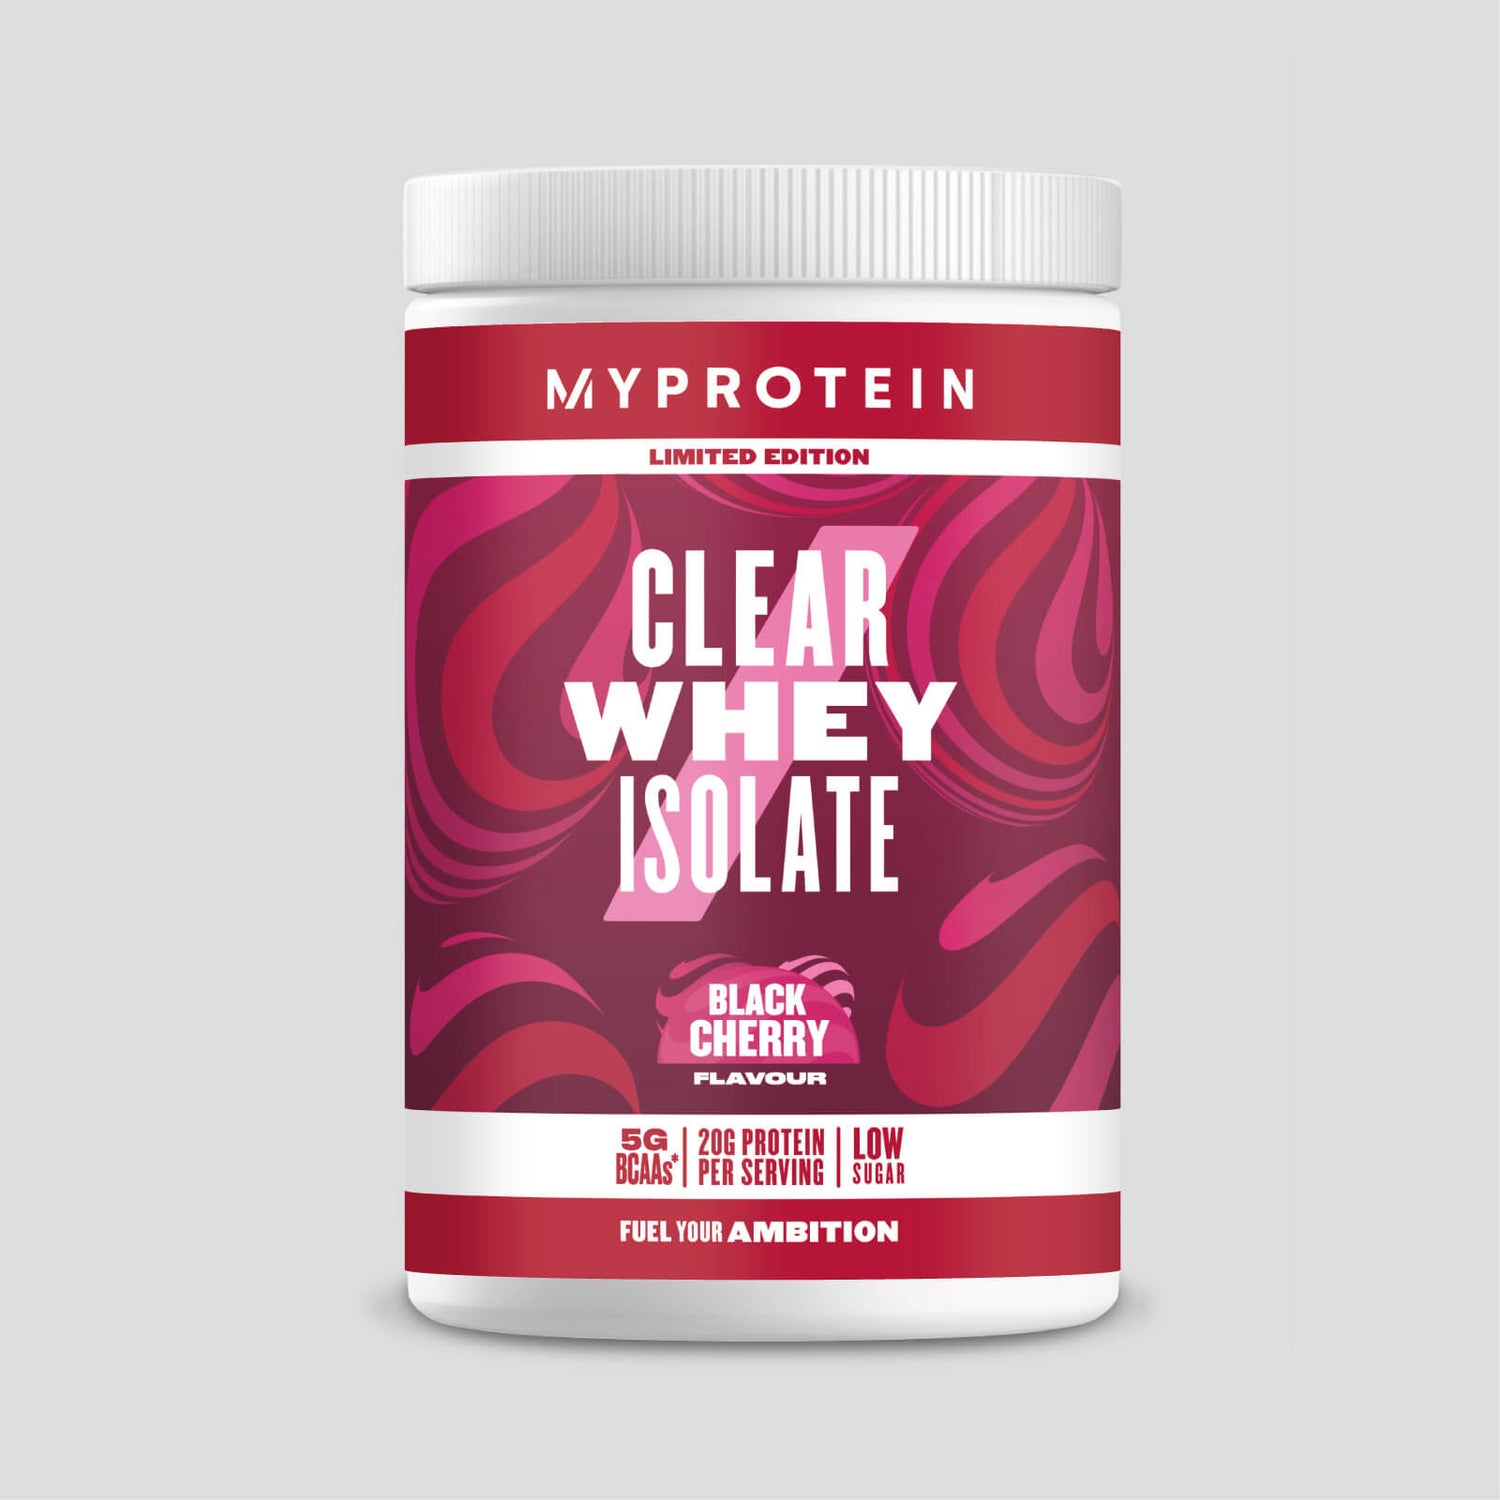 Clear Whey Isolate - Black Cherry flavour - 20servings - Black Cherry